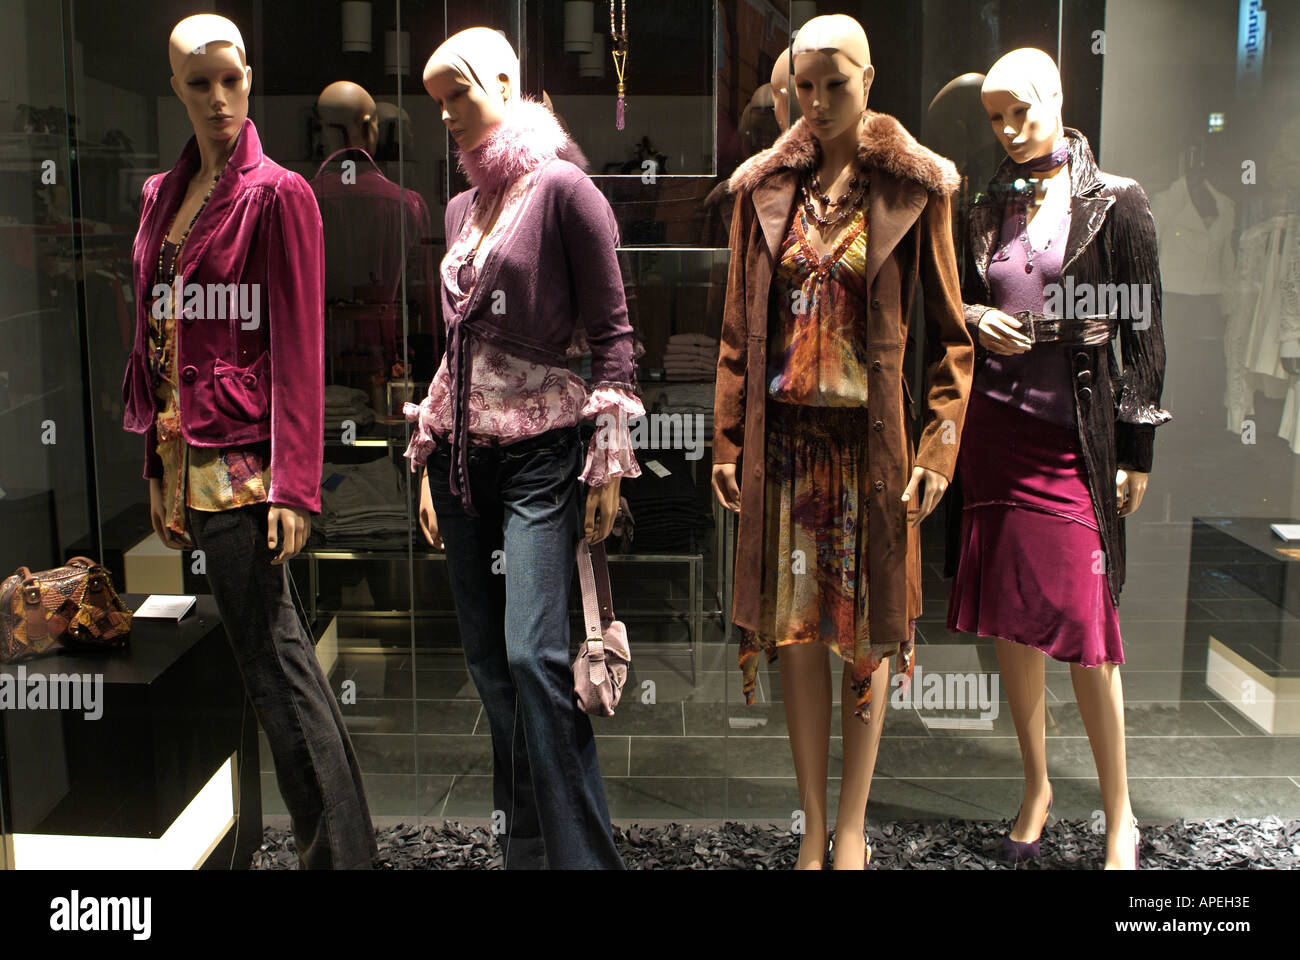 Manikins in the Window of an Exclusive High Street Fashion Retailer Stock Photo